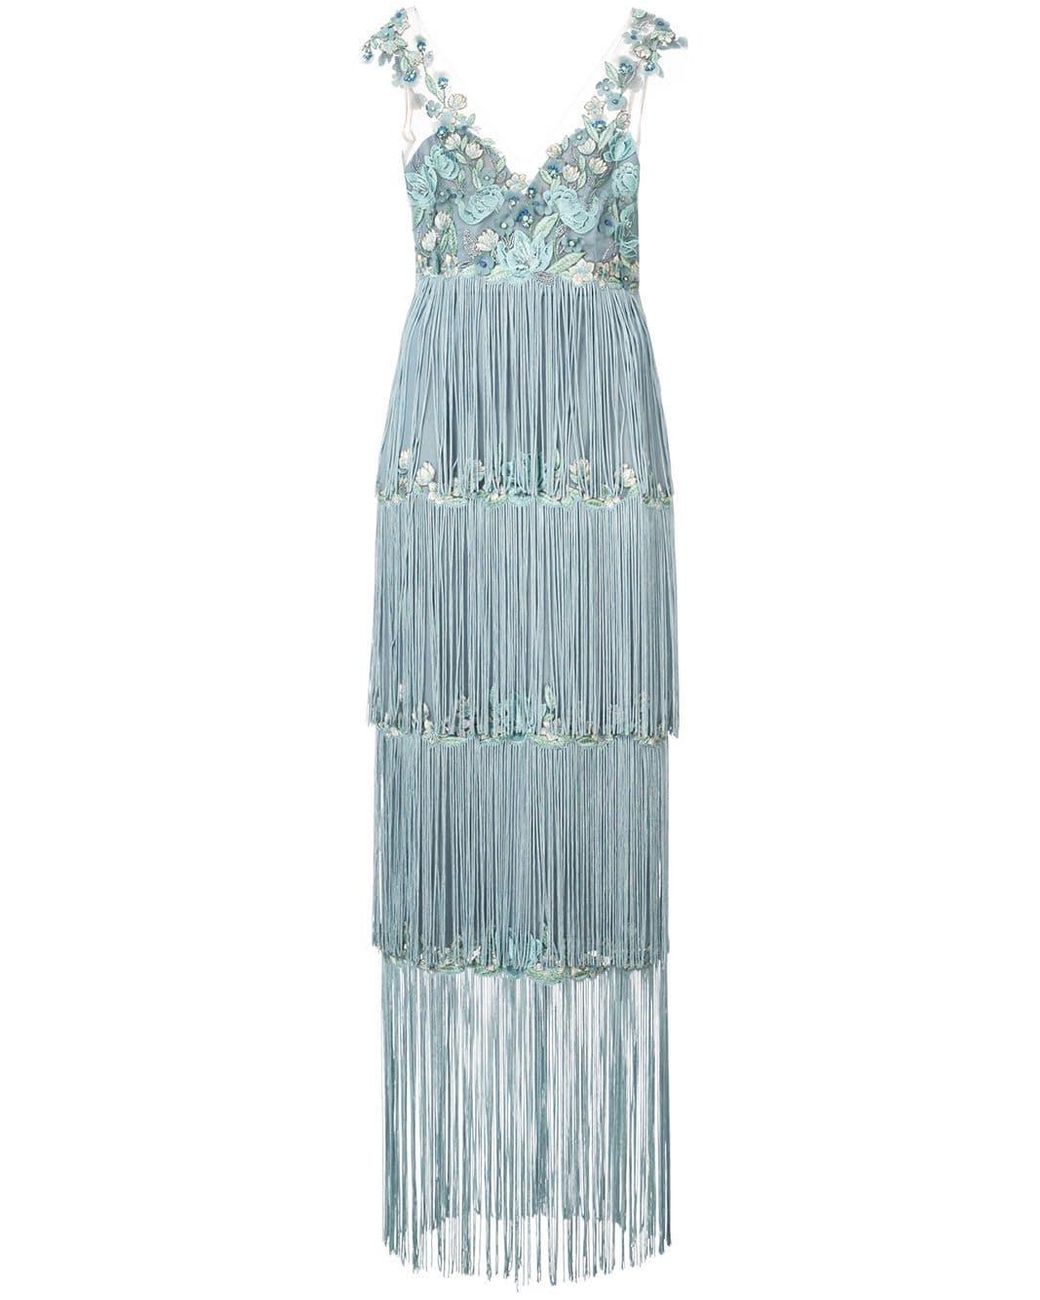 Marchesa notte Embroidered Fringe Dress in Blue | Lyst